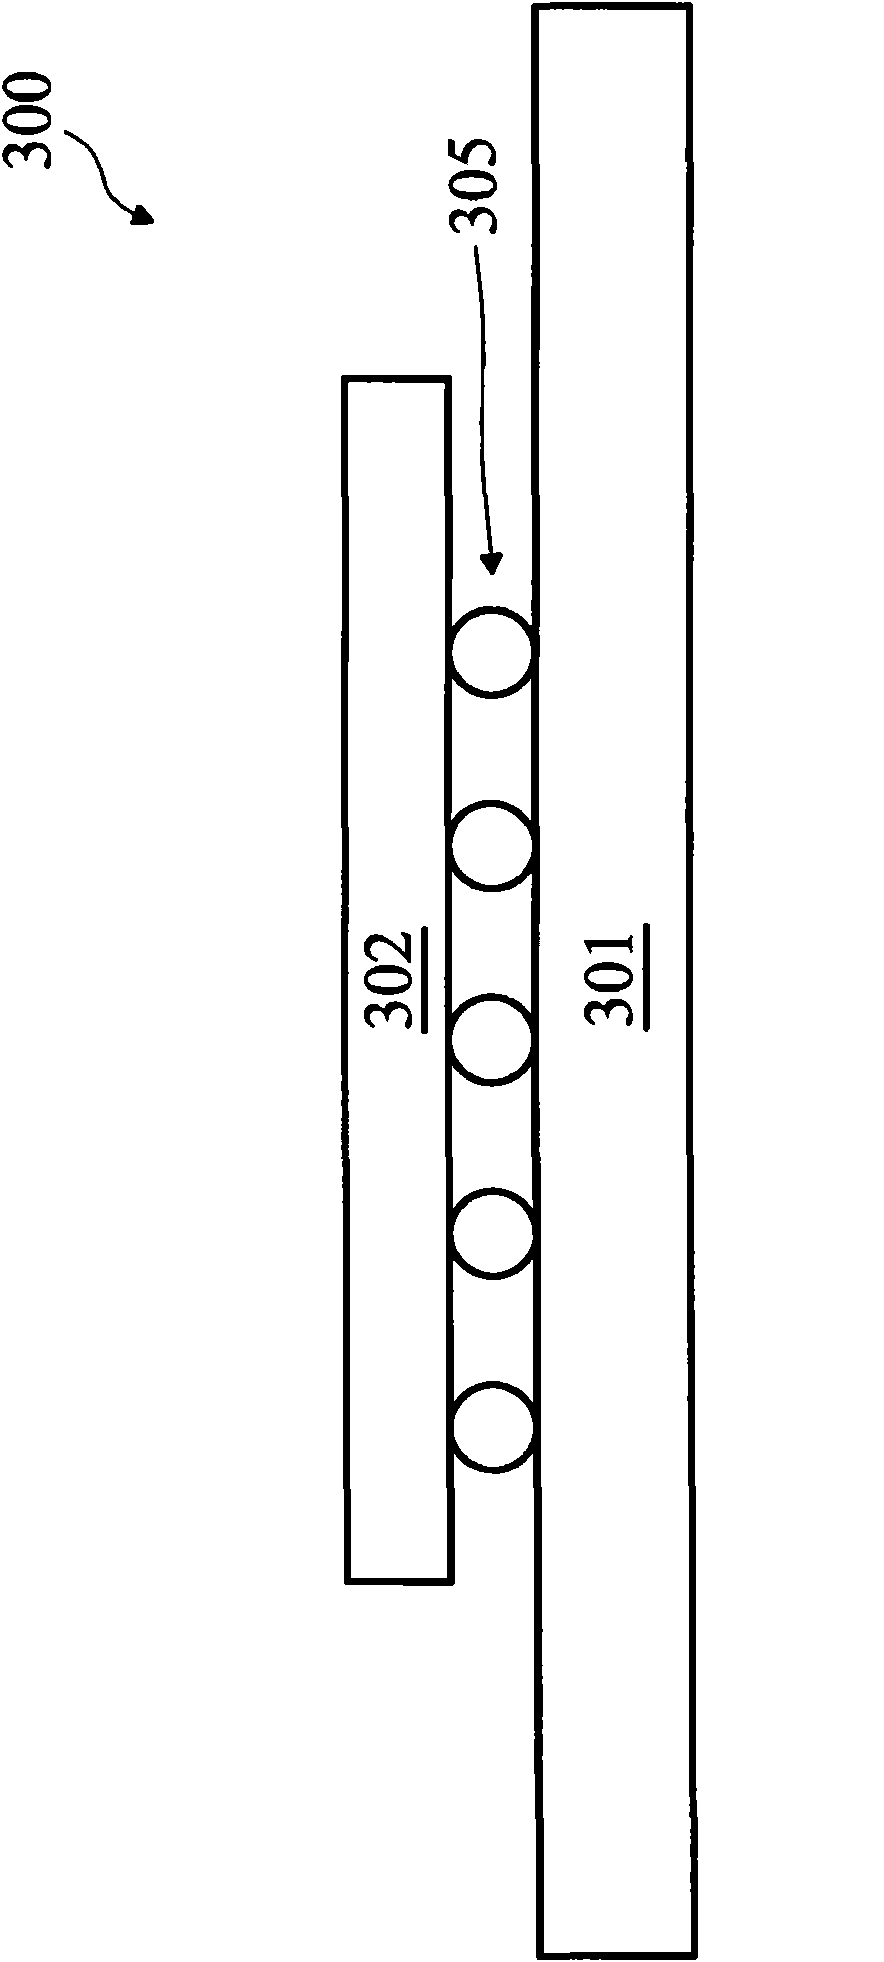 Integrated circuits including an lc tank circuit and operating methods thereof